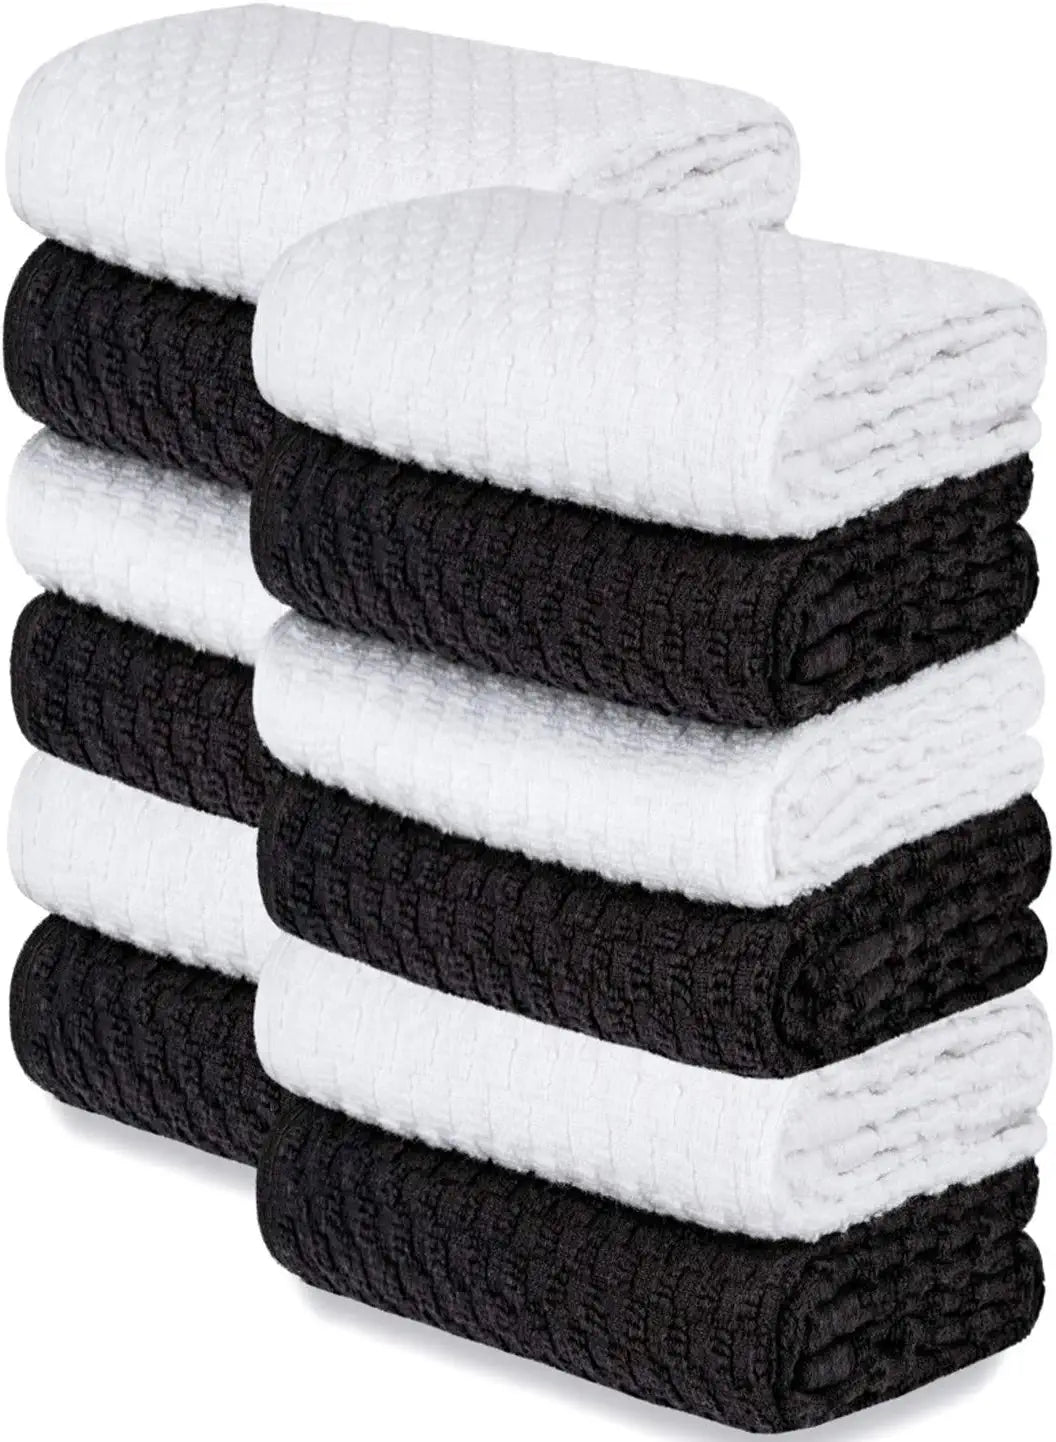 Black and White Dish Dobby Weave Hand Towels